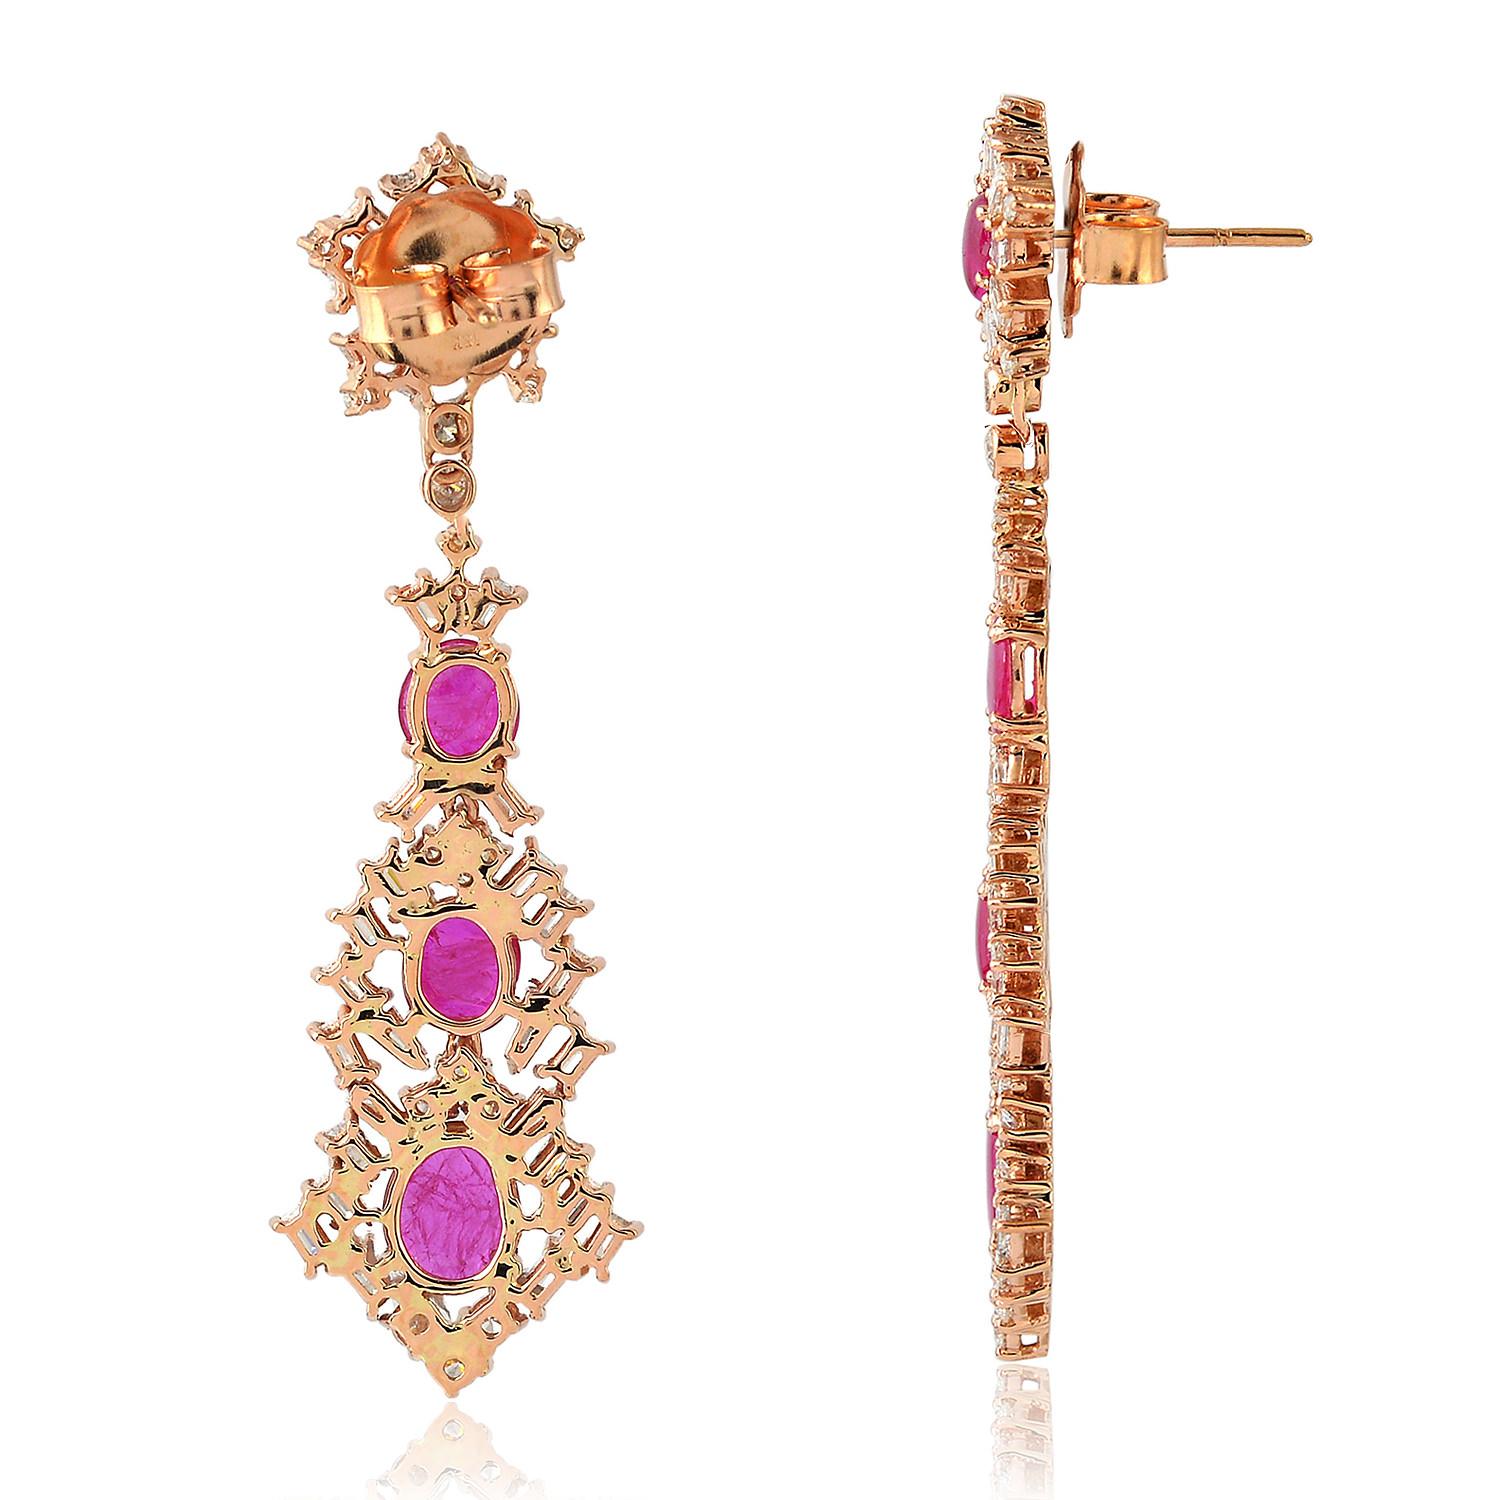 Cast from 18-karat gold, these stunning baguette diamond drop earrings are hand set with 4.1 carats ruby and 3.4 carats of glittering diamonds.

FOLLOW  MEGHNA JEWELS storefront to view the latest collection & exclusive pieces.  Meghna Jewels is